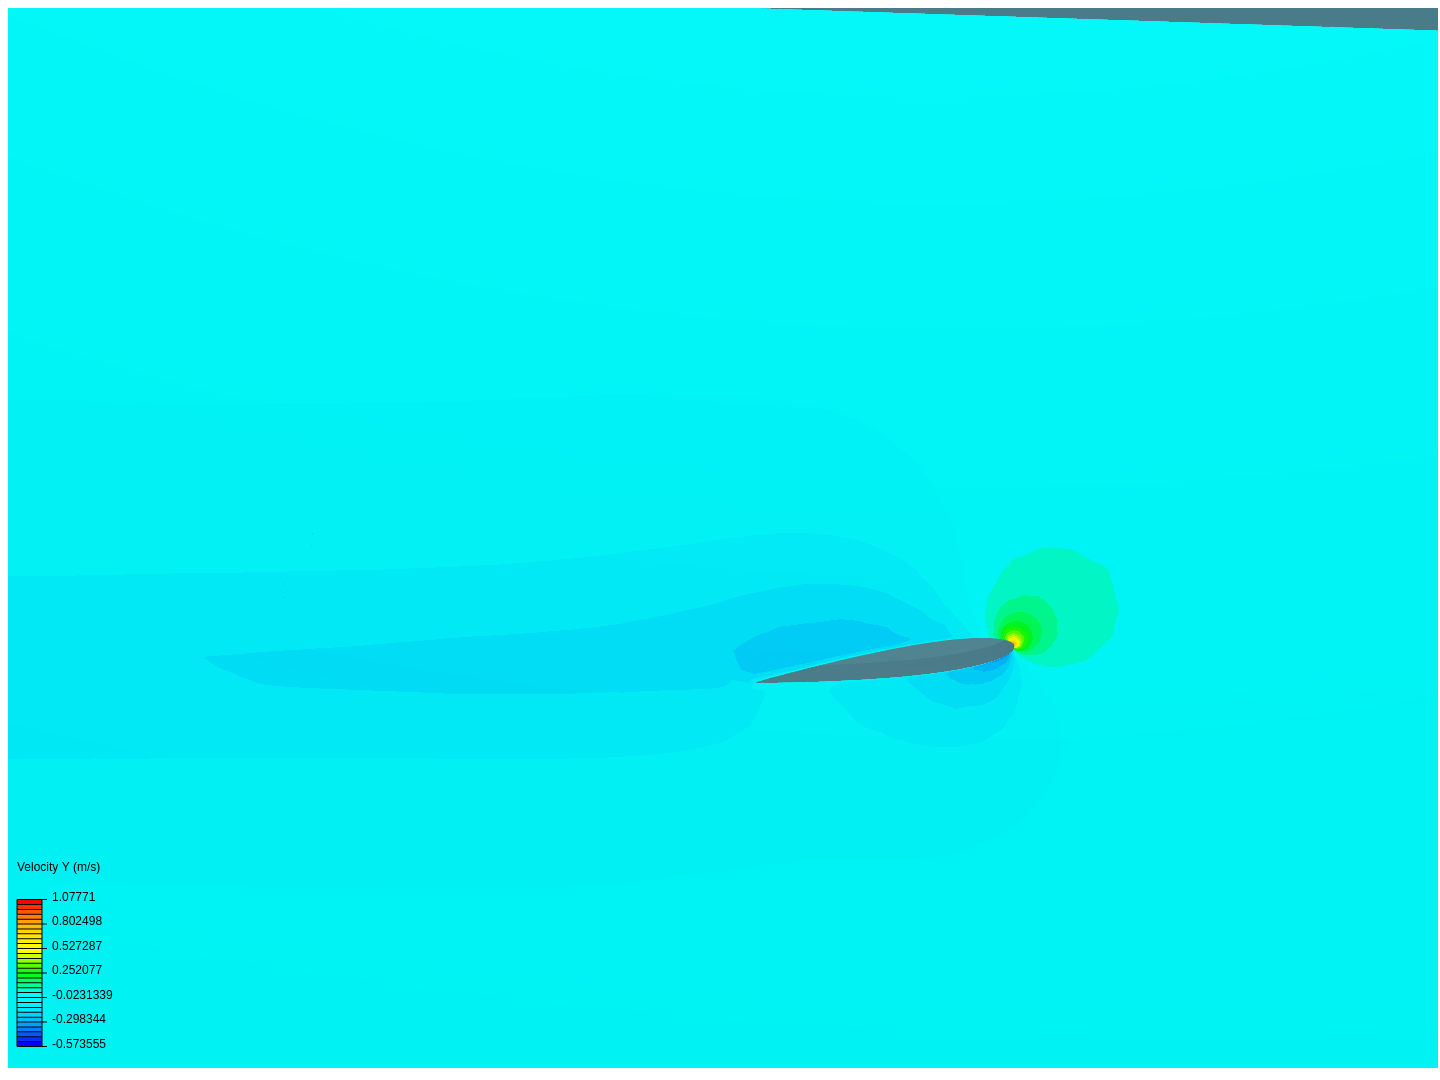 airfoil 2 image